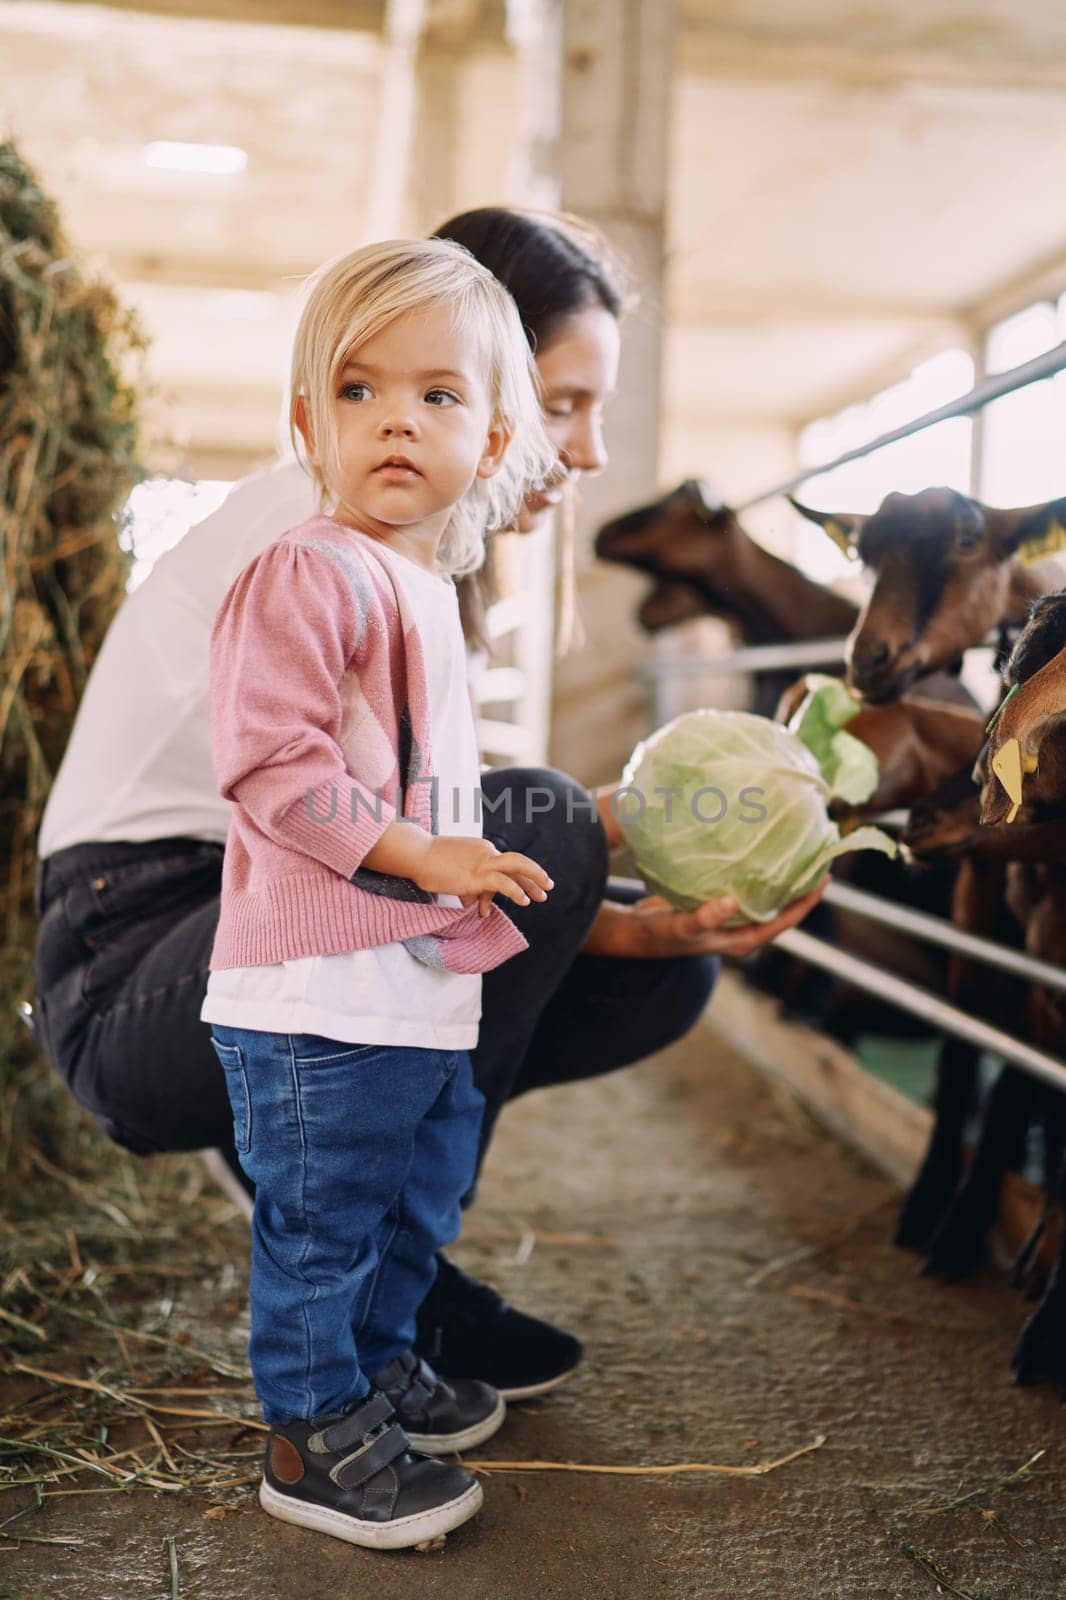 Little girl stands with her head turned near her mother feeding cabbage leaves to goats on a farm by Nadtochiy